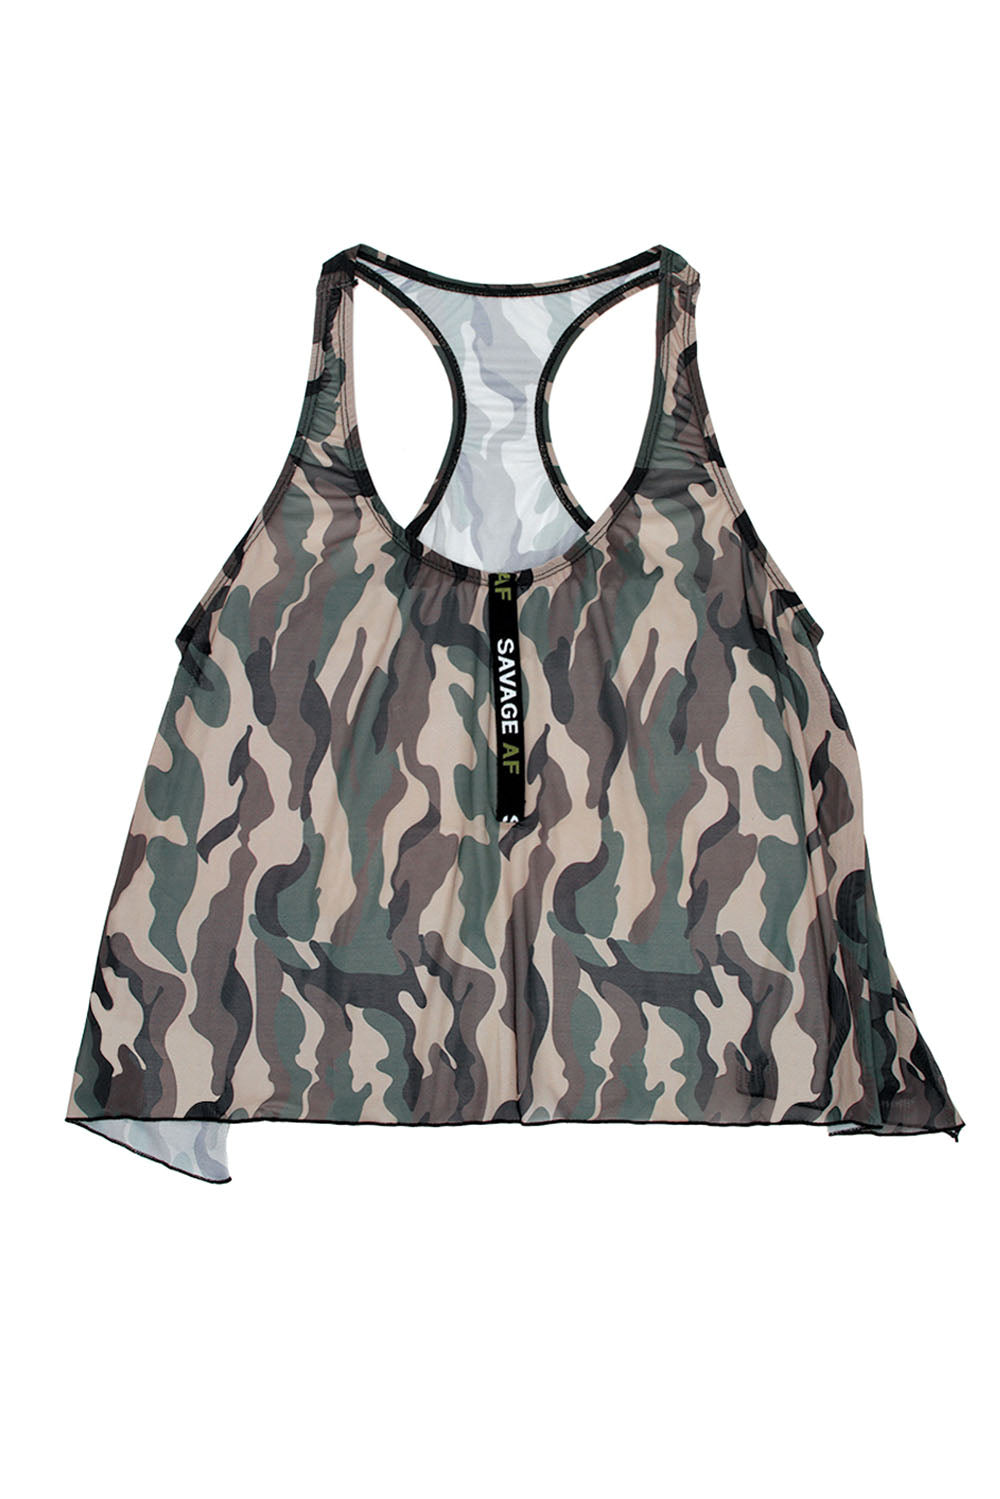 Savage Af Swing Top - Forest Camo - M-l